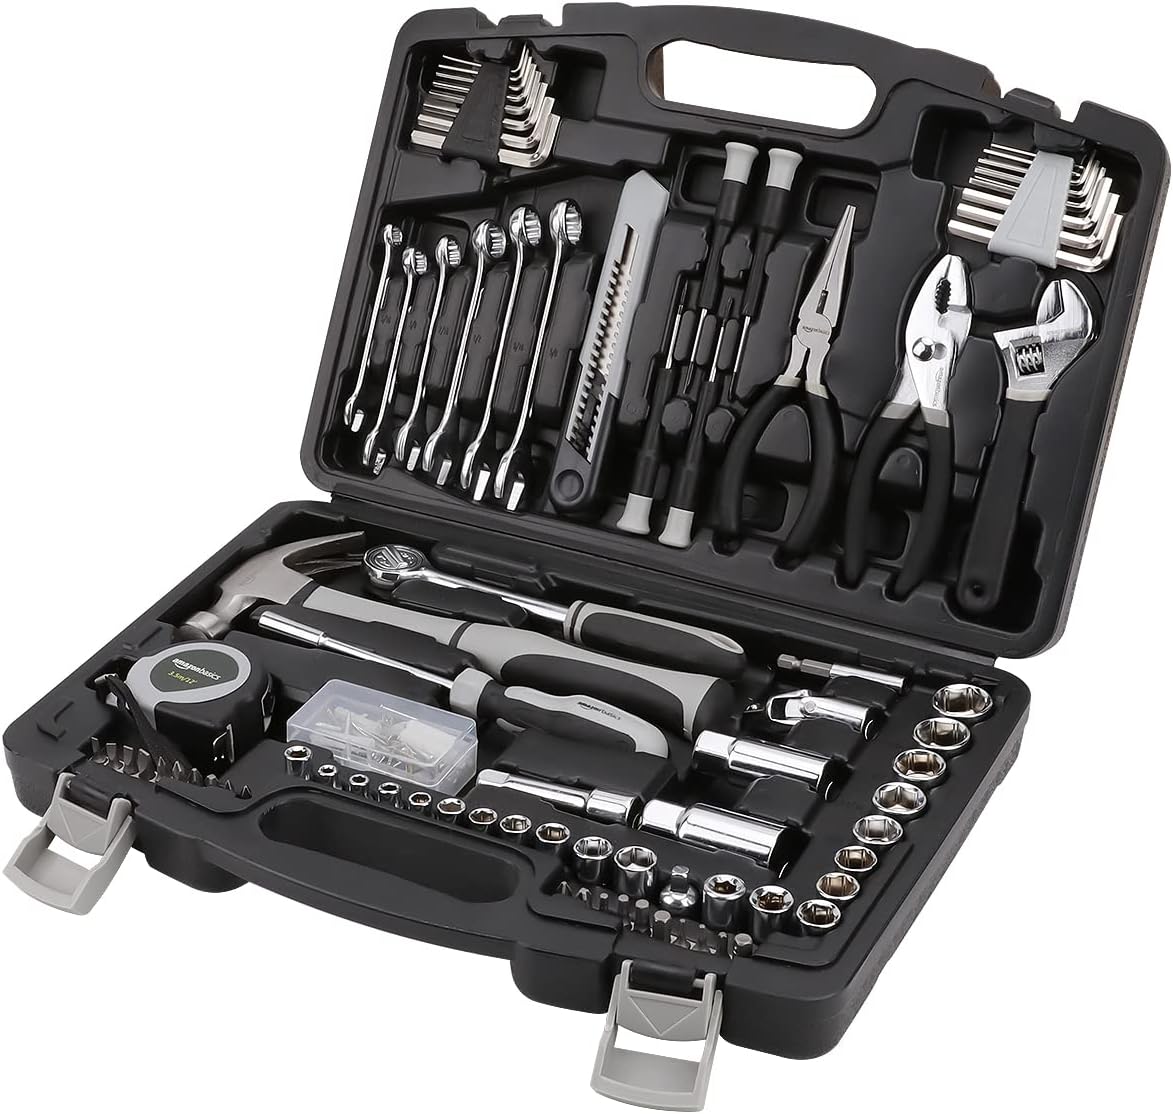 131-Piece General Household Home Repair and Mechanic's Hand Tool Kit Set